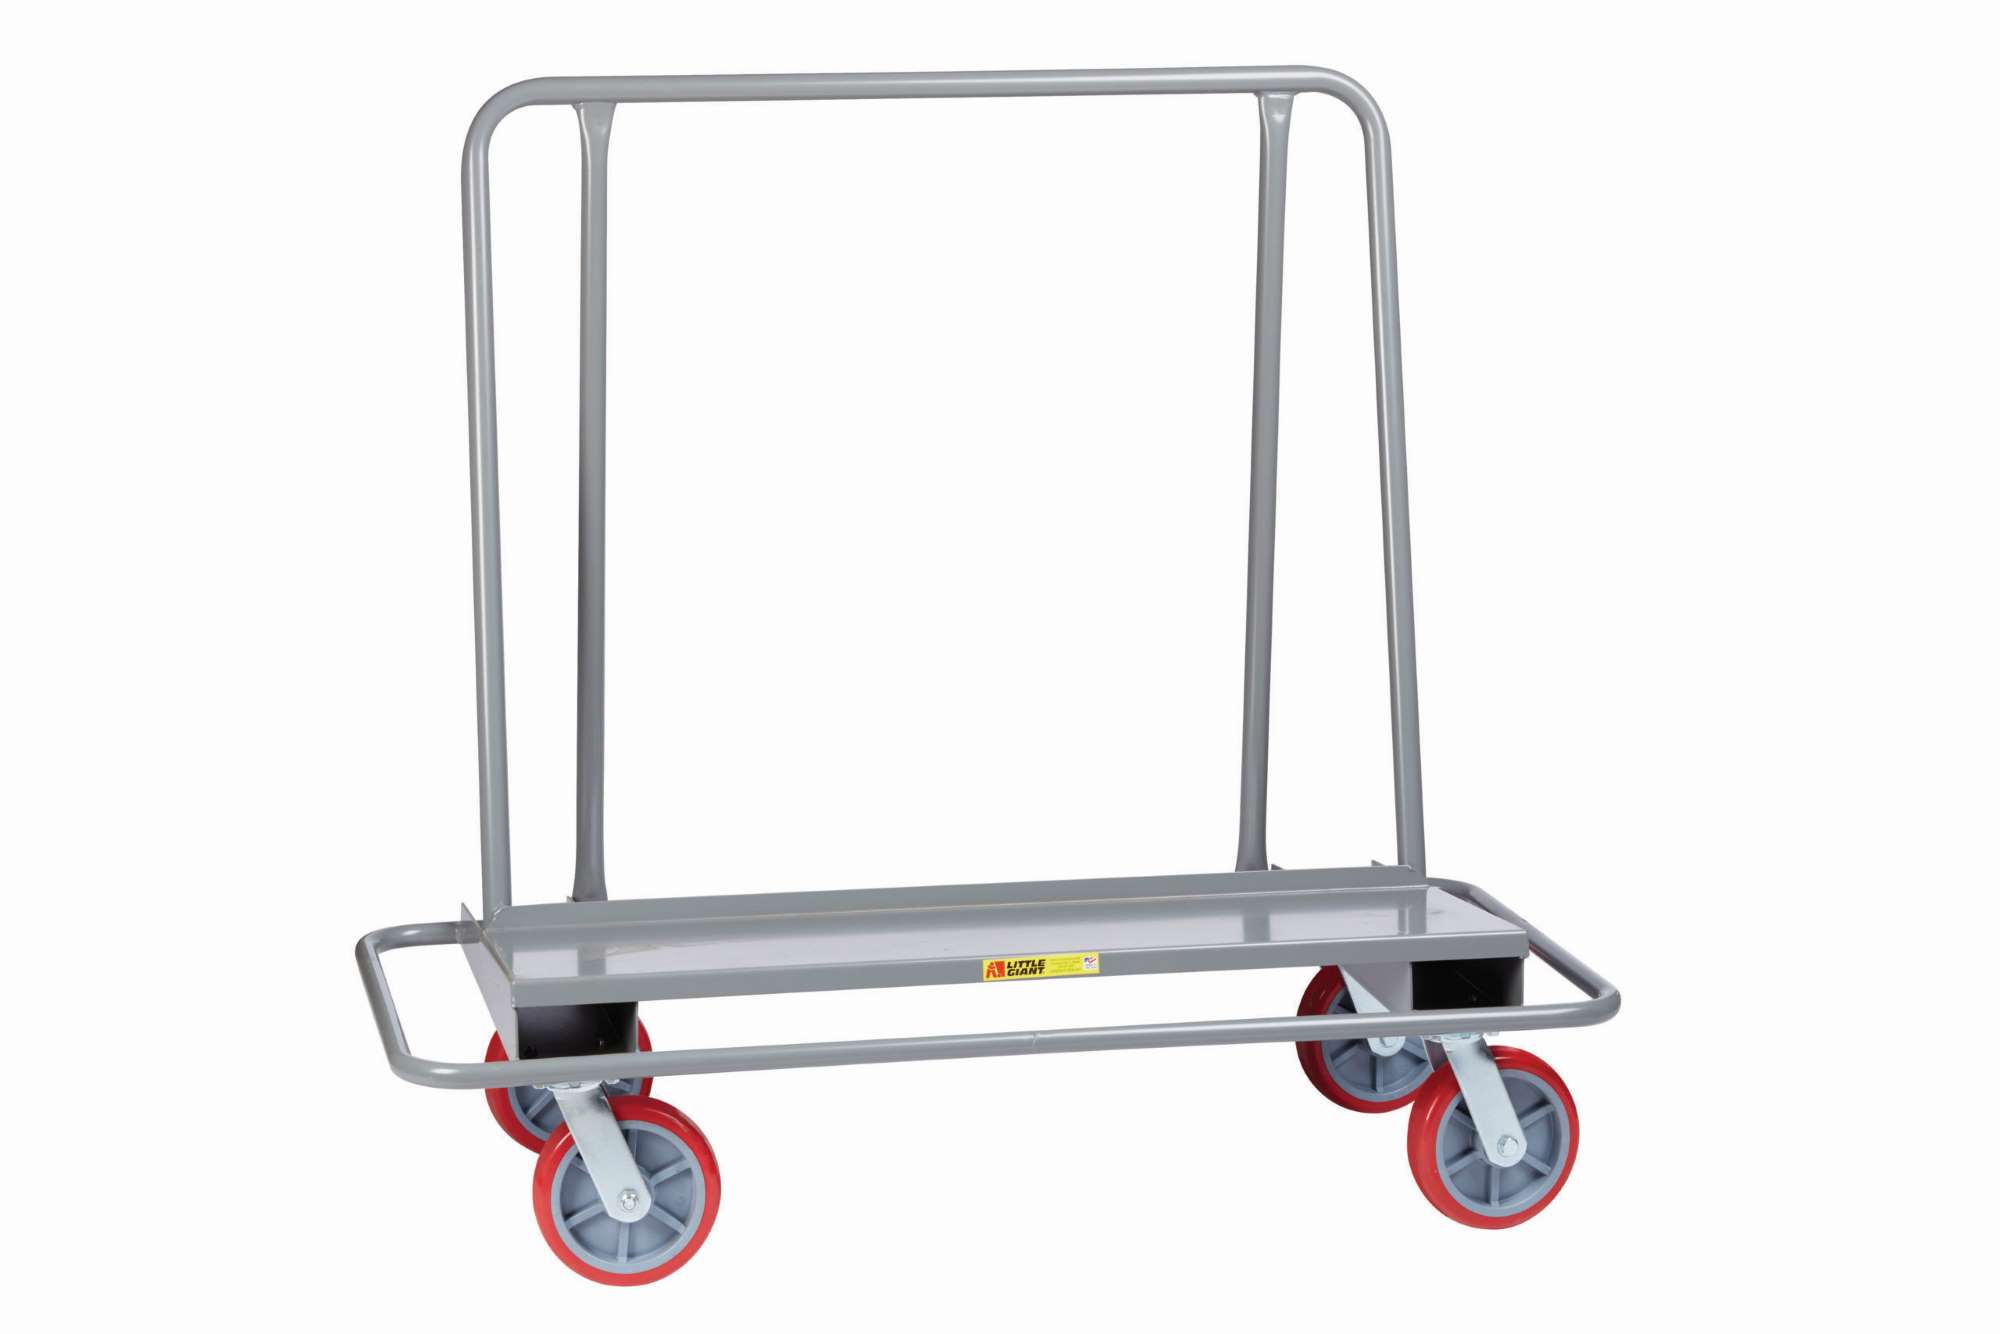 Little Giant, Drywall cart with steel bumper frame, 2000 lbs capacity, Tube steel bumper, 12ga deck, 14"x44" deck, Avialable with 4 swivel casters or 2 rigid / 2 swivel casters with floor lock, 8"wheels, Overall 26"W x 54"L x 51"H